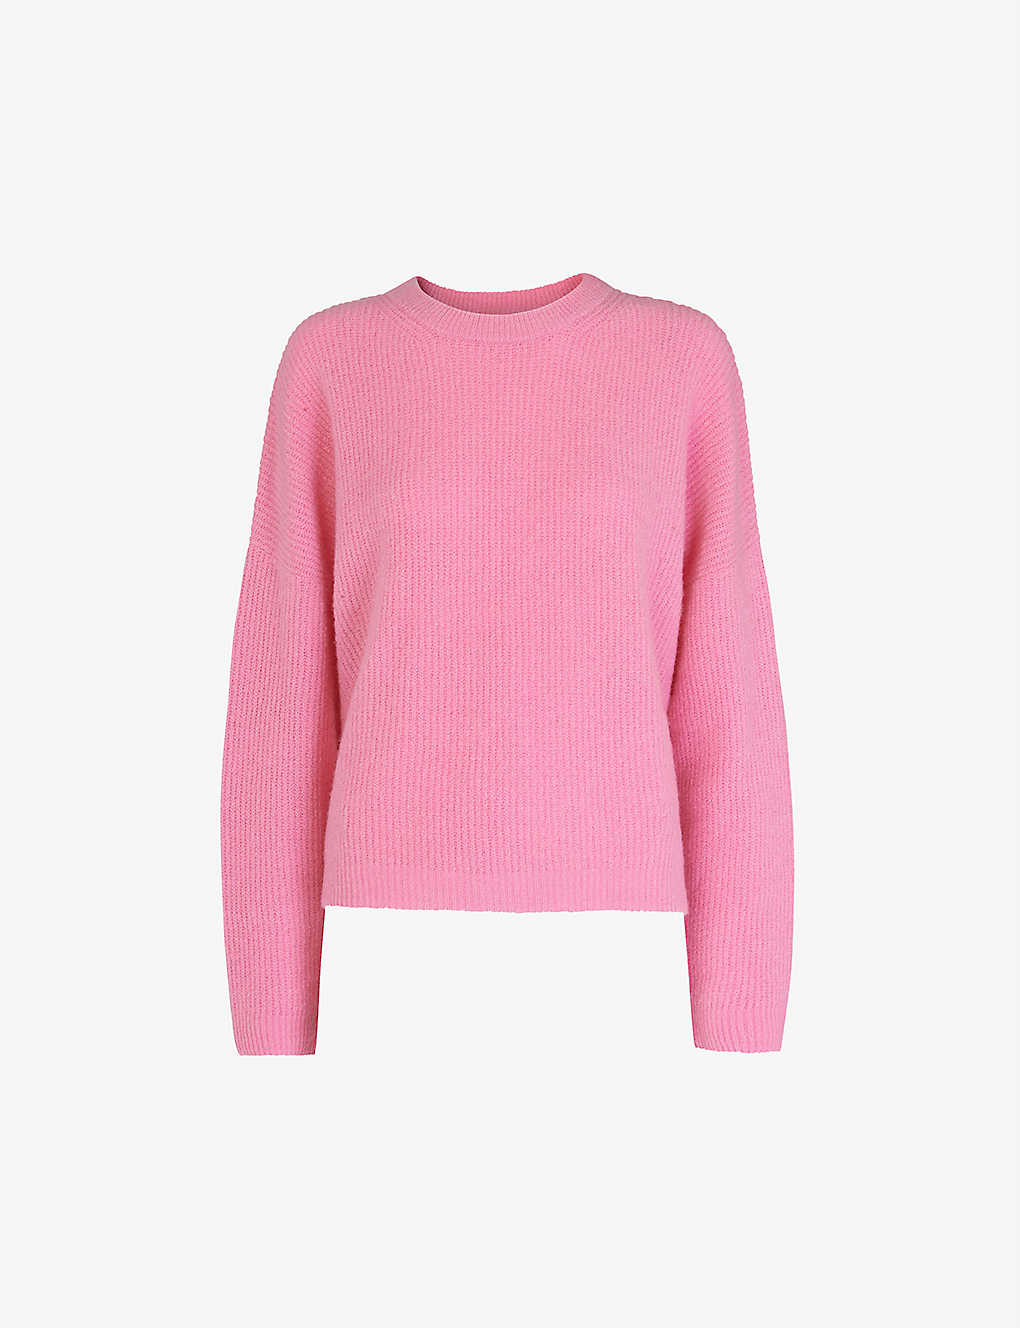 Whistles Womens Pink Ribbed Knitted Jumper S